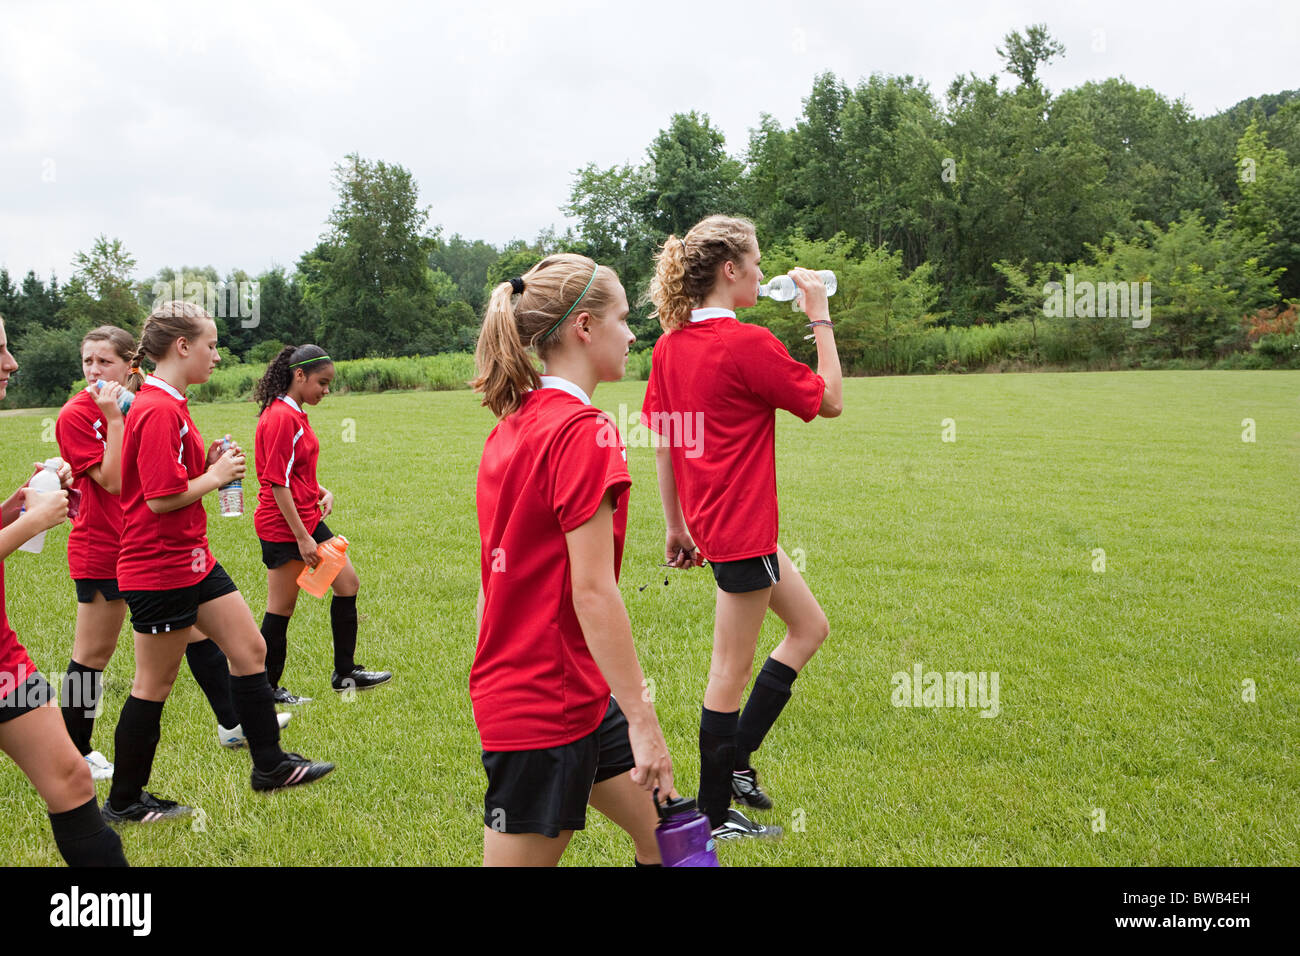 Girl soccer players on field Stock Photo